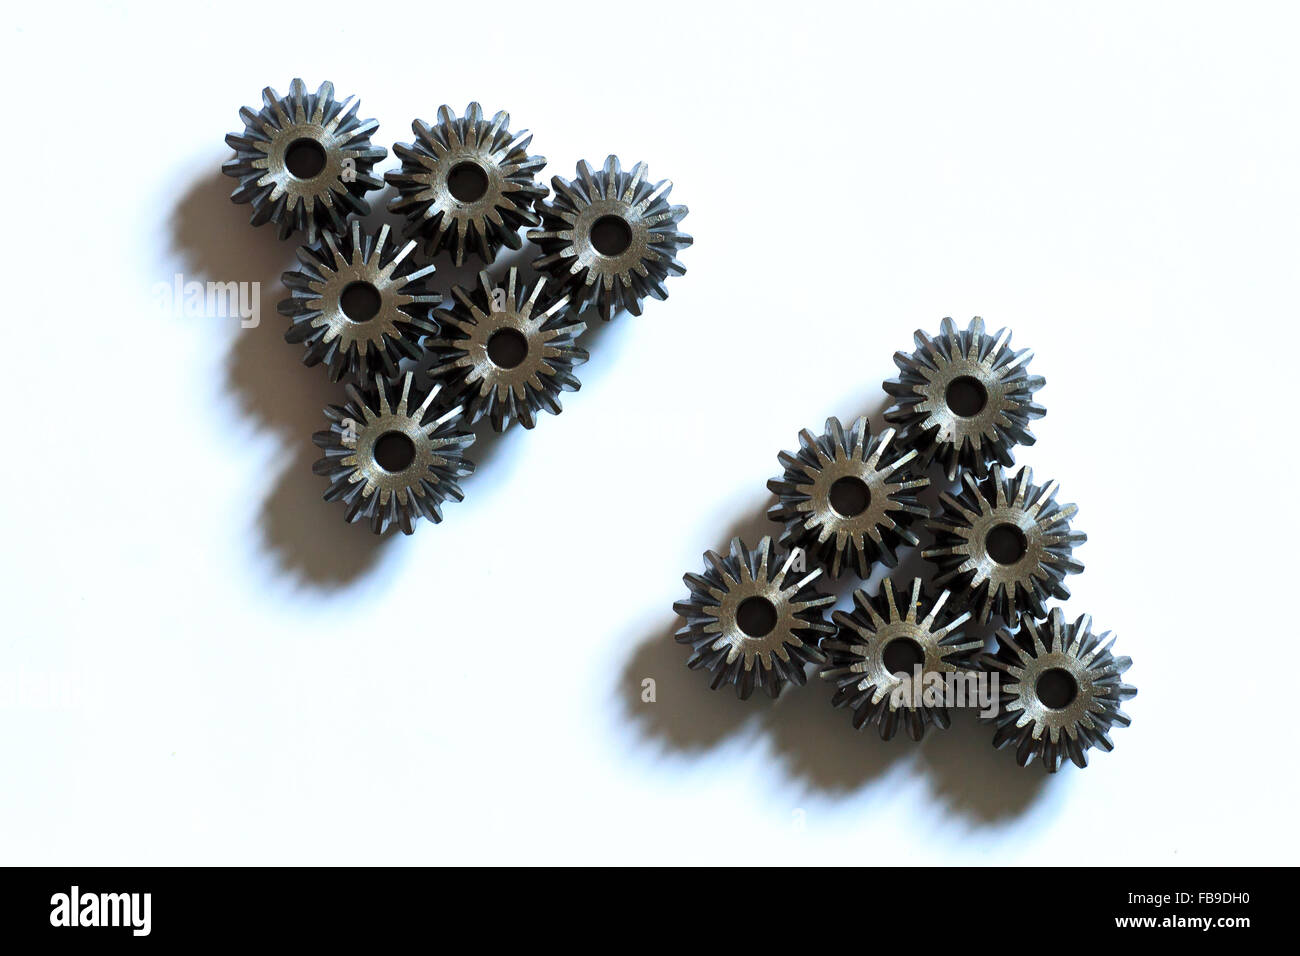 A background of mechanical components, gear, industrial objects Stock Photo